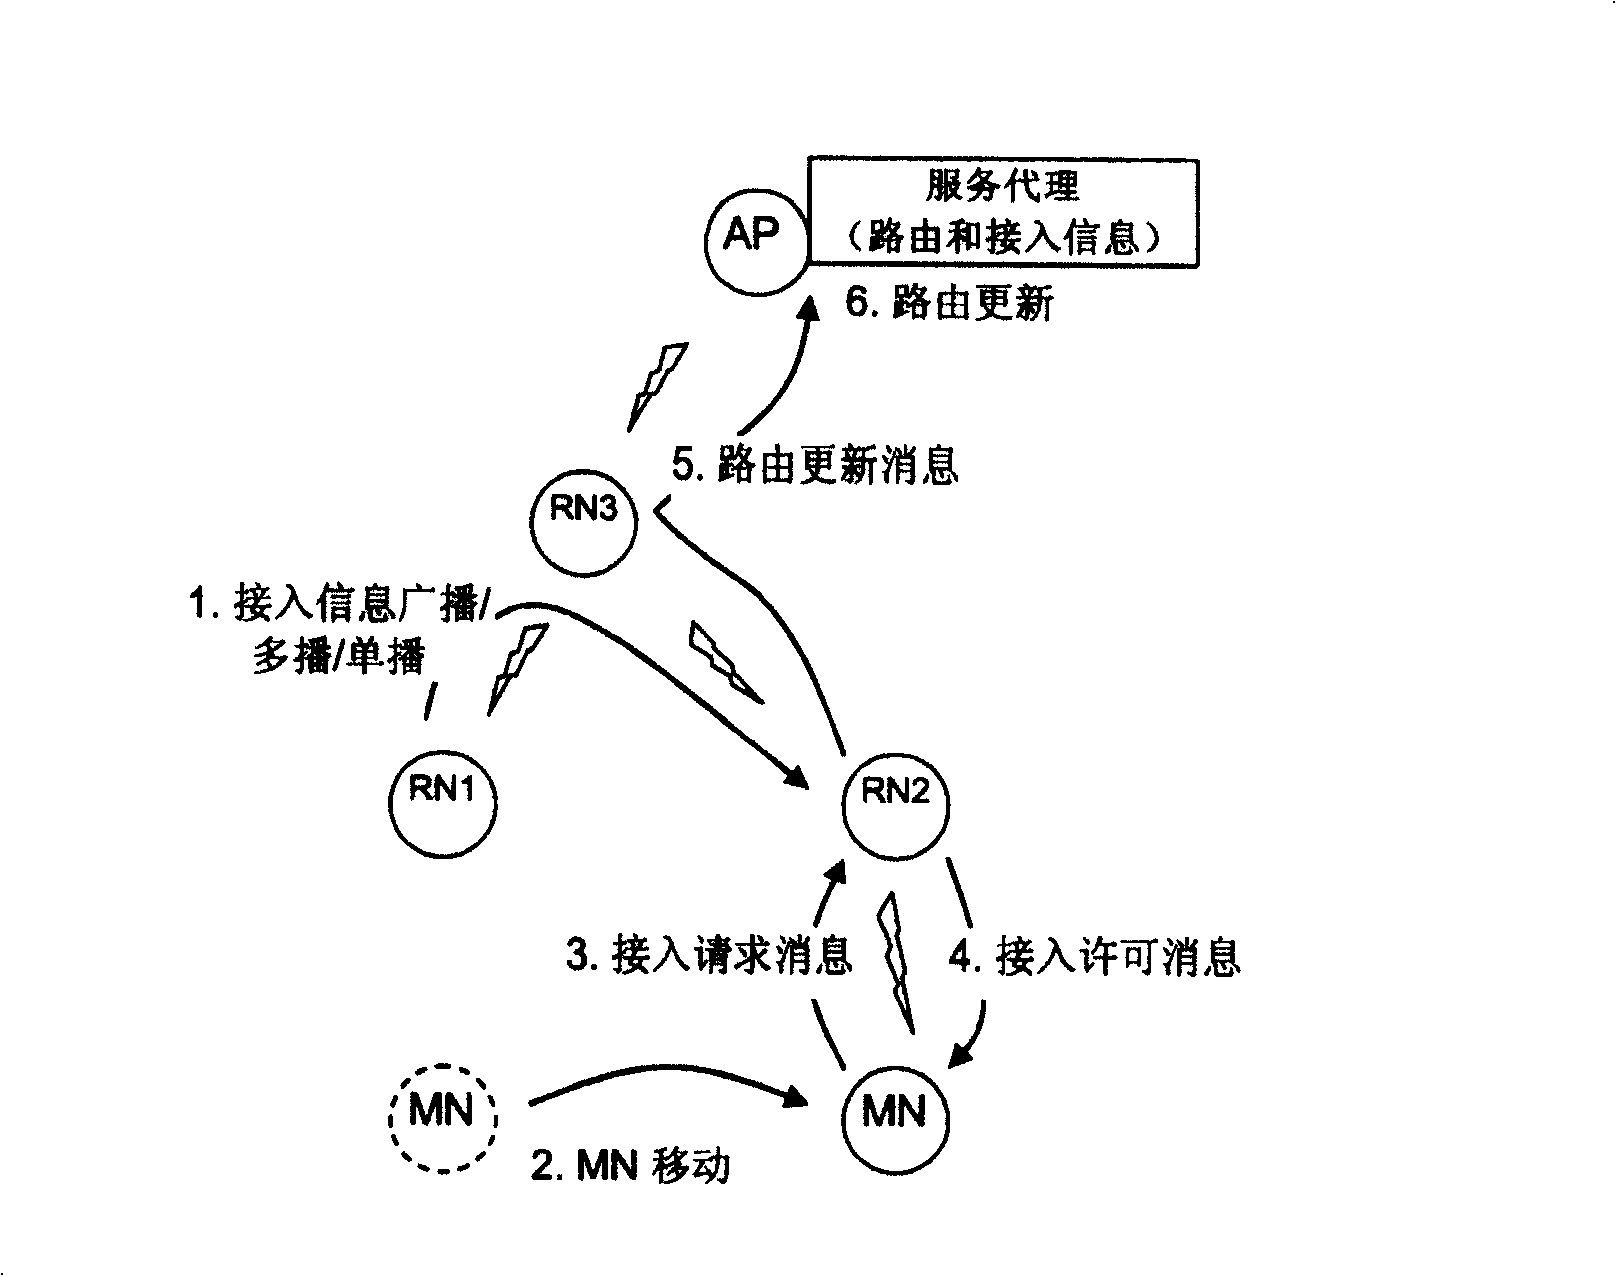 Distributed multihop wireless network access method